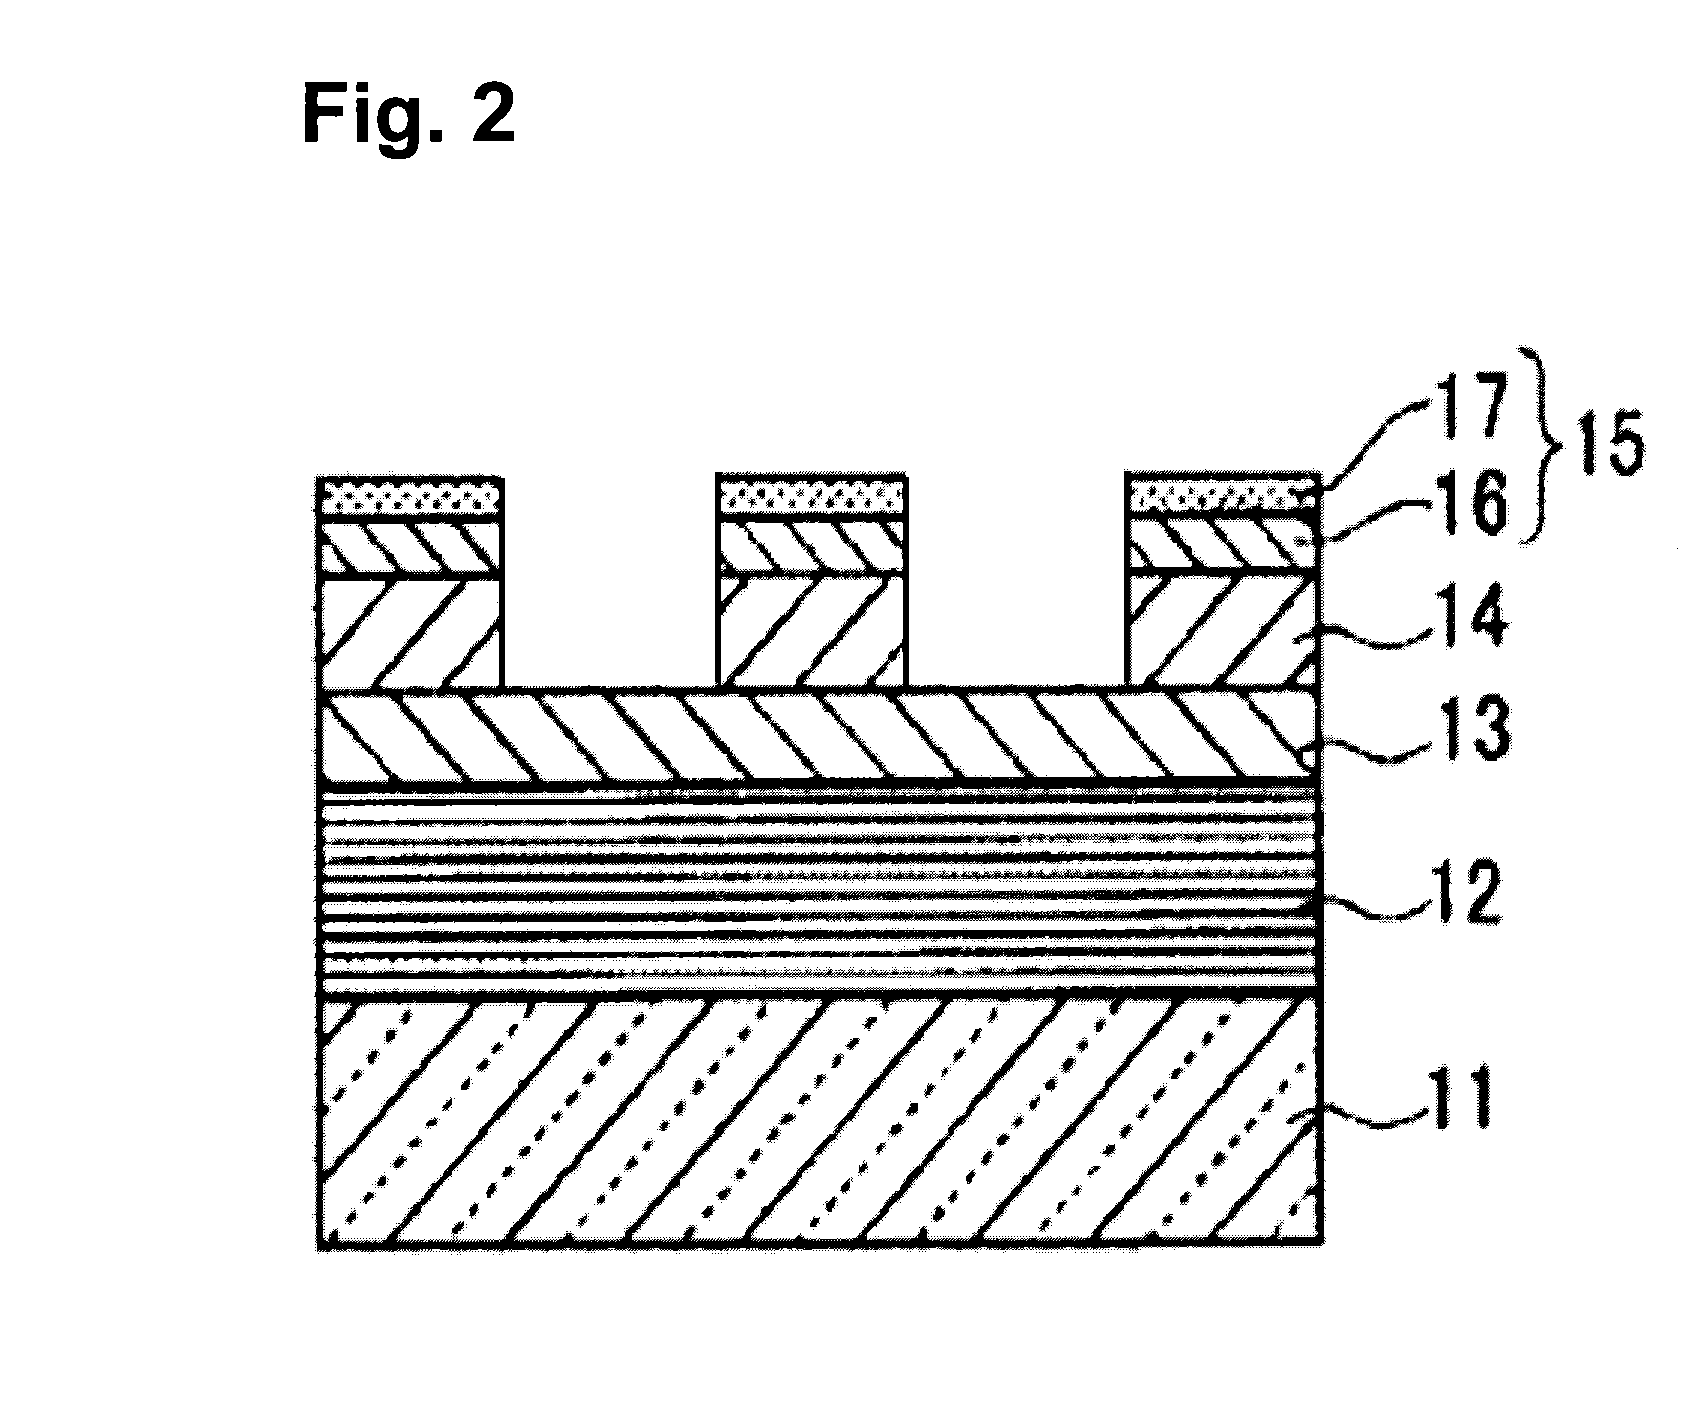 Reflective mask blank for EUV lithography and process for producing the same